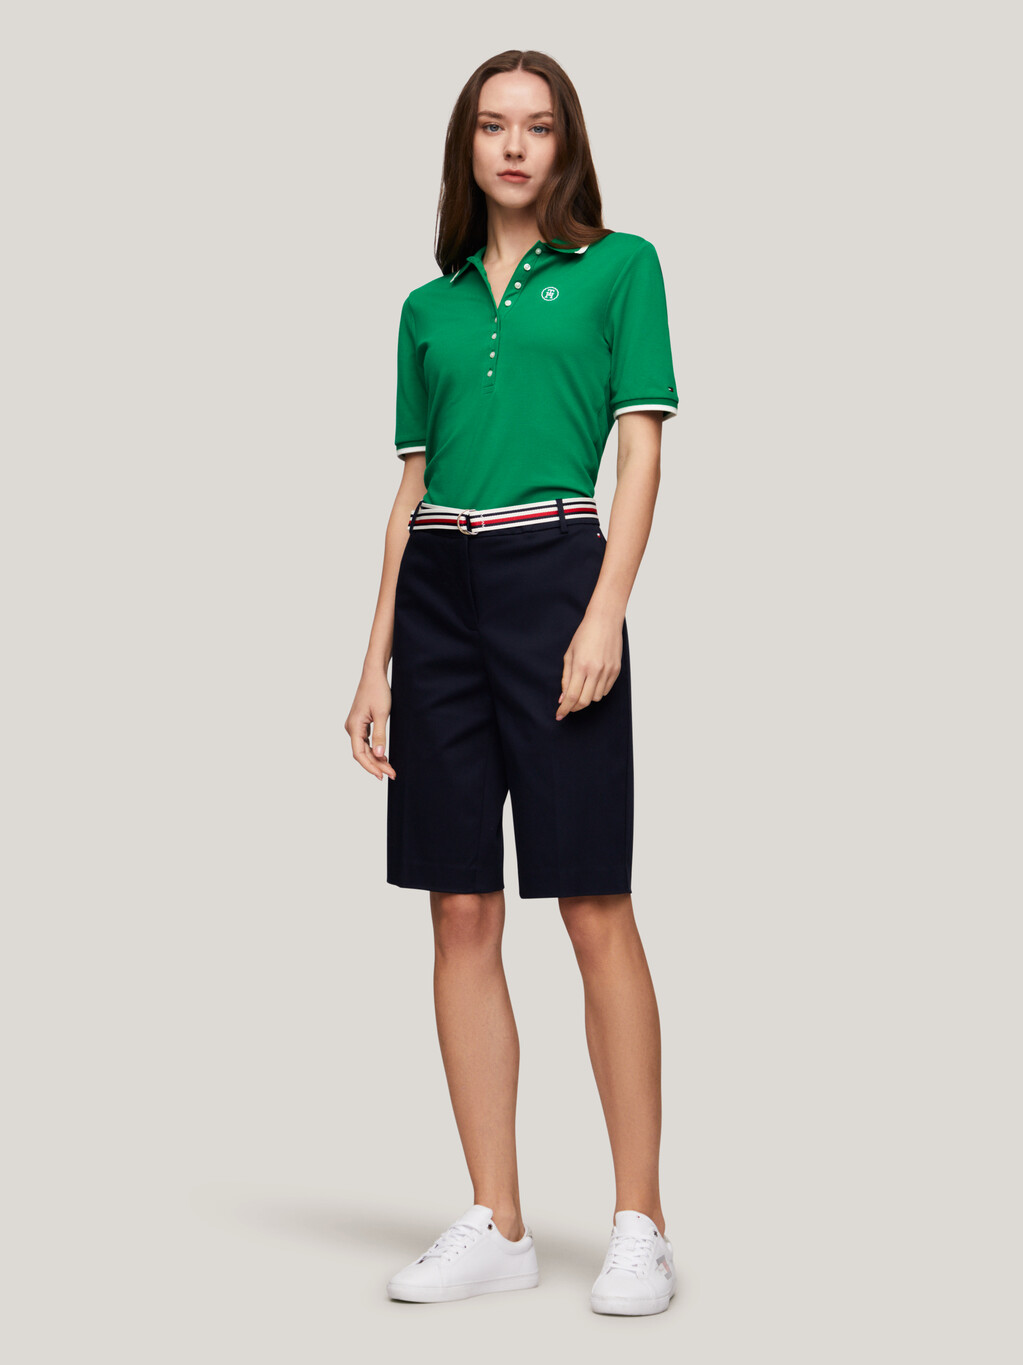 TH Monogram Tipped Slim Fit Polo, Olympic Green, hi-res